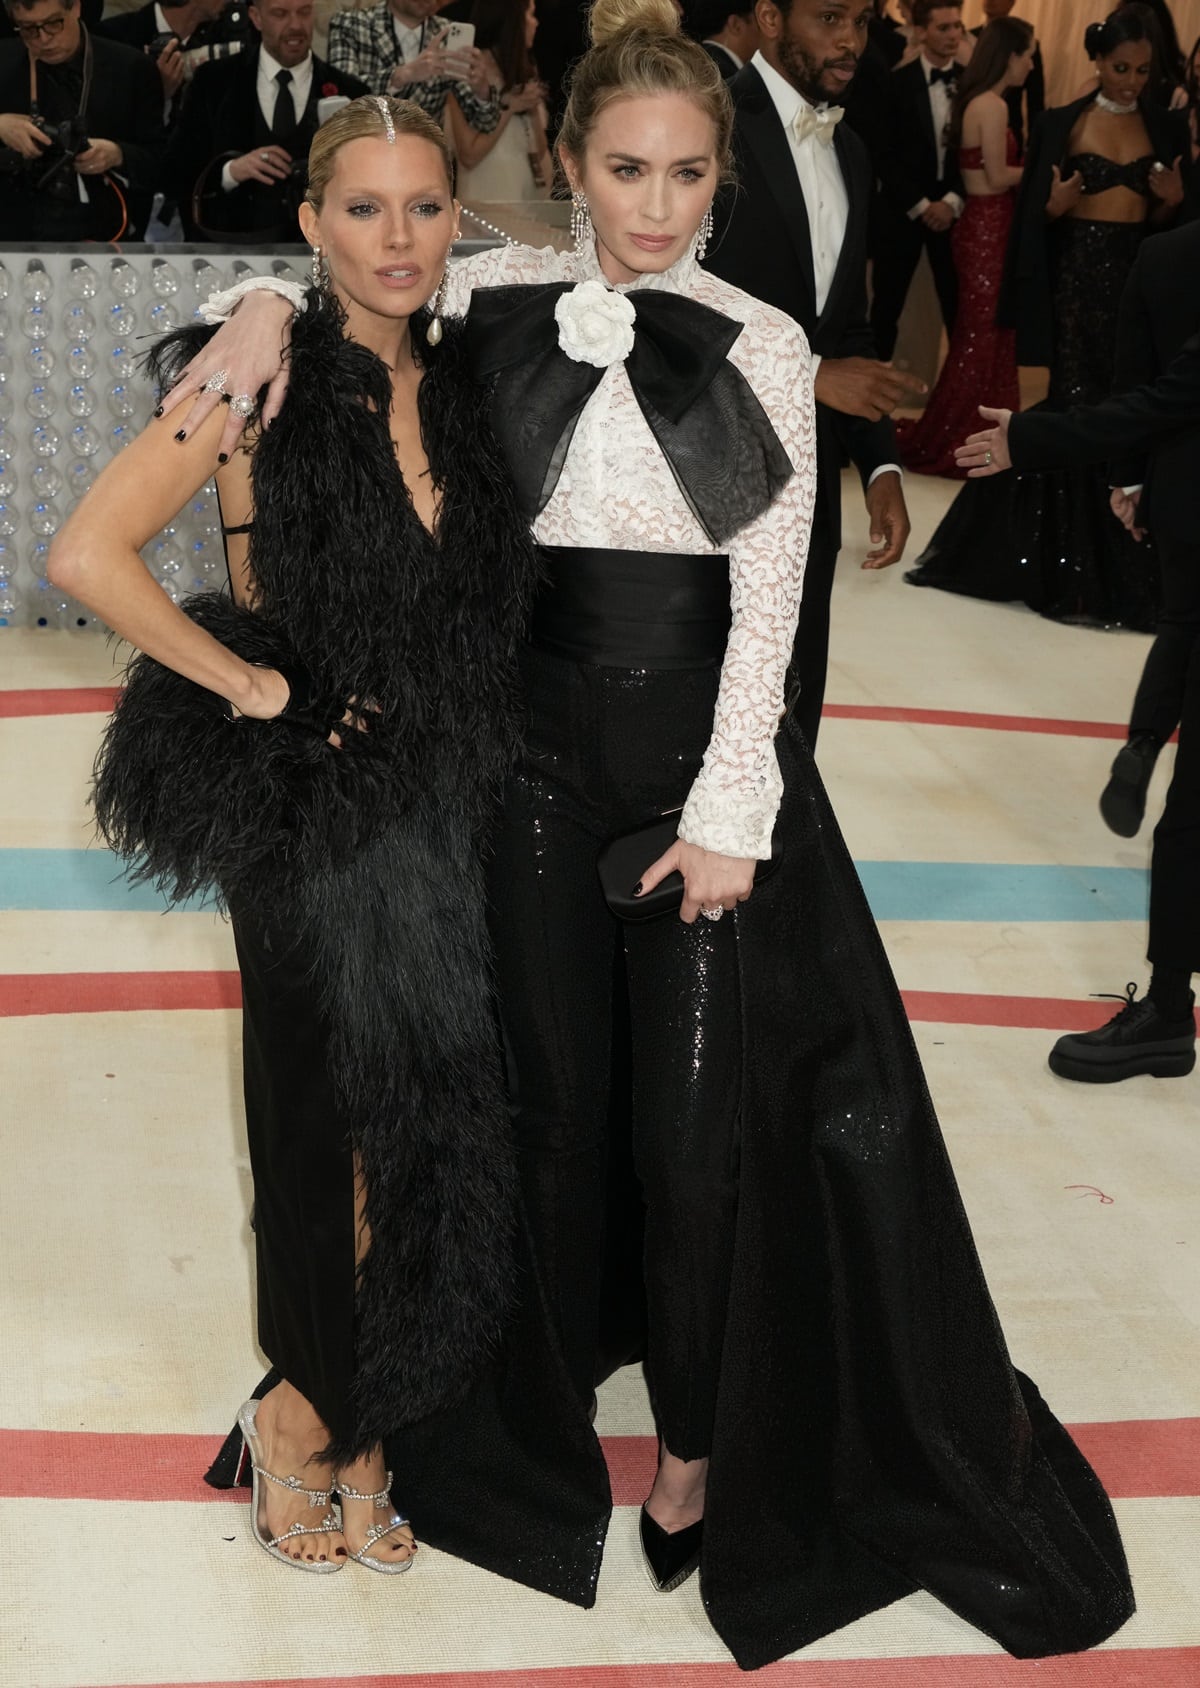 At the 2023 Met Gala in New York City, Emily Blunt stood taller than Sienna Miller, with a height of 5 feet 6 ½ inches (168.9 cm), compared to Sienna Miller's 5 feet 5 inches (165.1 cm), resulting in a 1 ½ inch (3.8 cm) difference between them, as they celebrated 